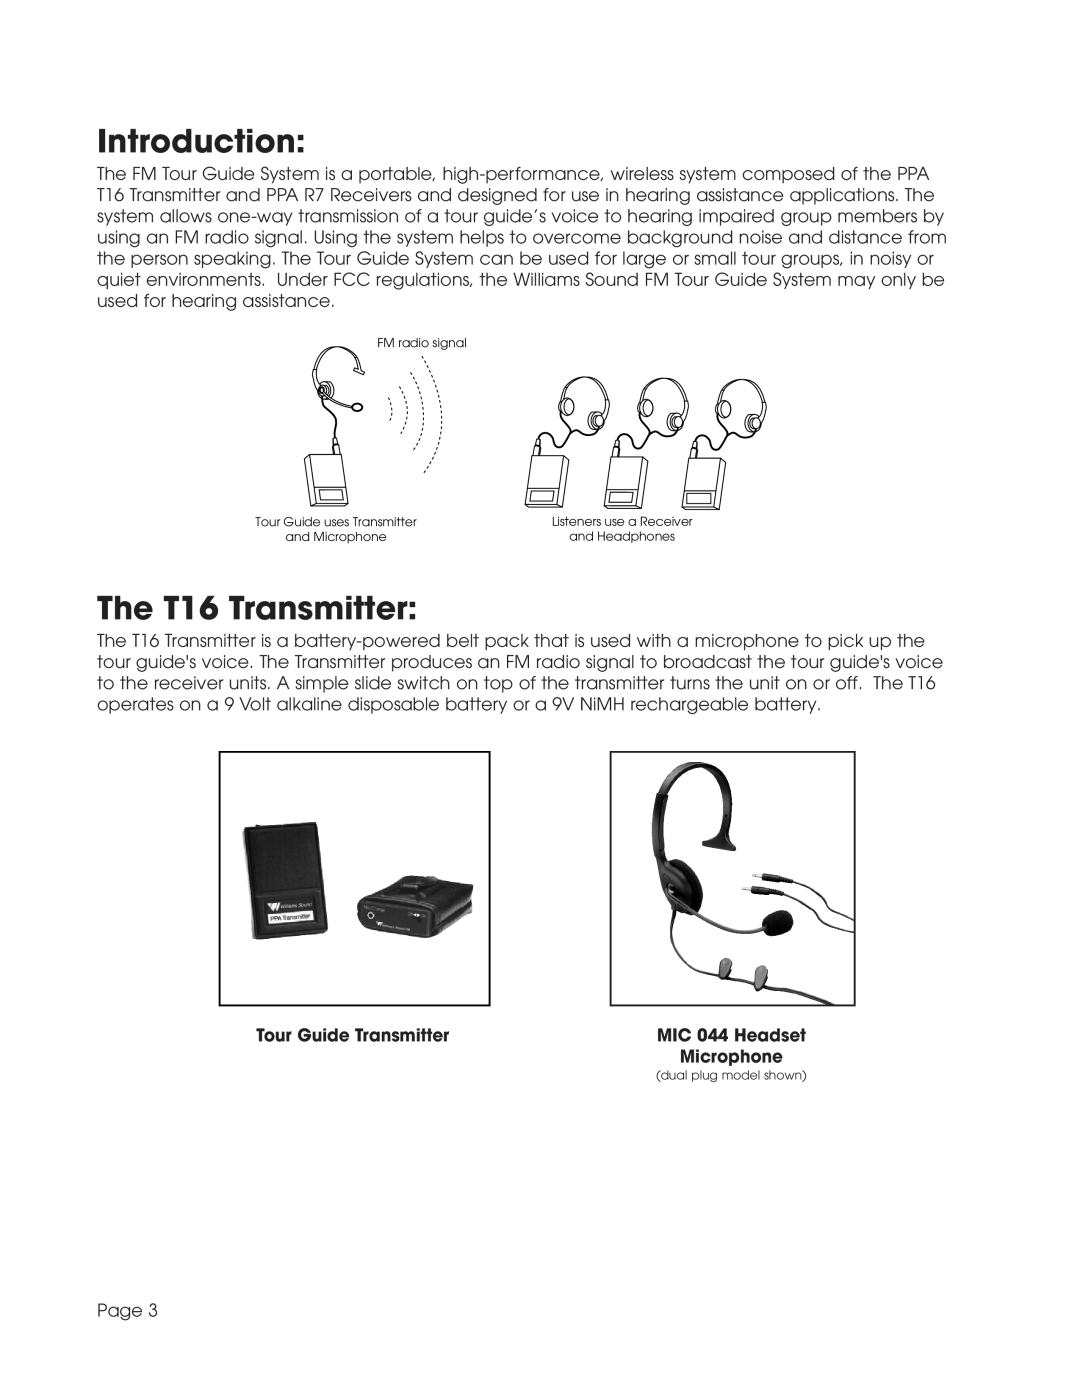 Williams Sound TGS SYS A manual Introduction, The T16 Transmitter, Tour Guide Transmitter, MIC 044 Headset, Microphone 